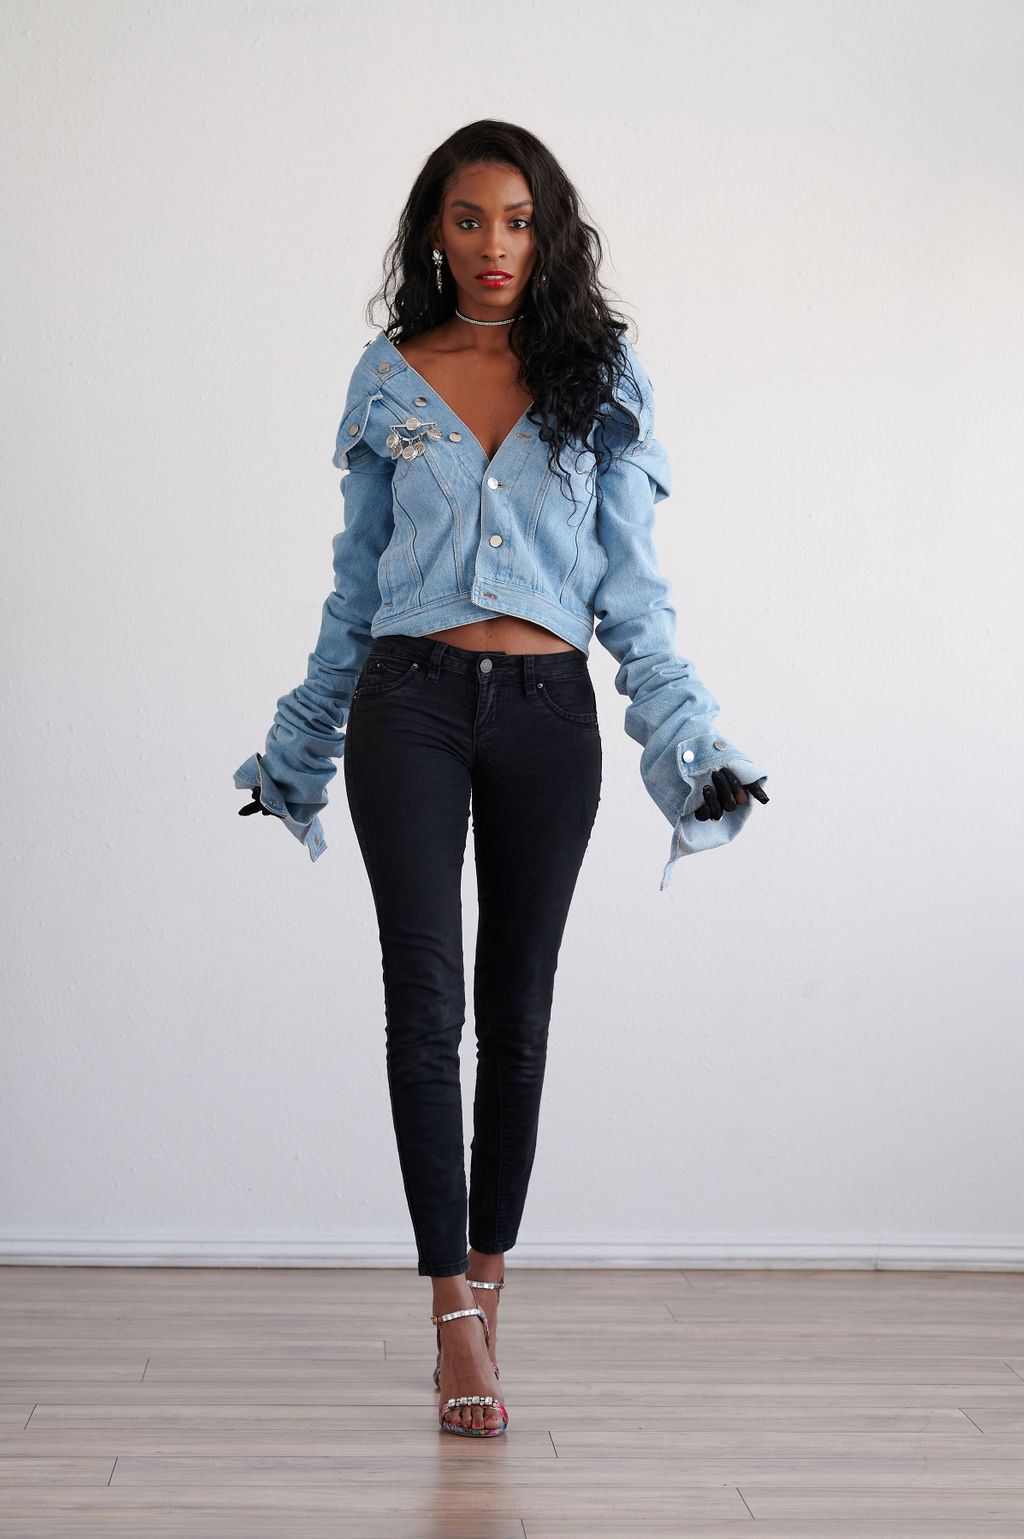 Annjulia Smalls In Y Project-styled by melissa-lcm-sheldon botler photography-denim jacket-elongated sleeves-high fashion